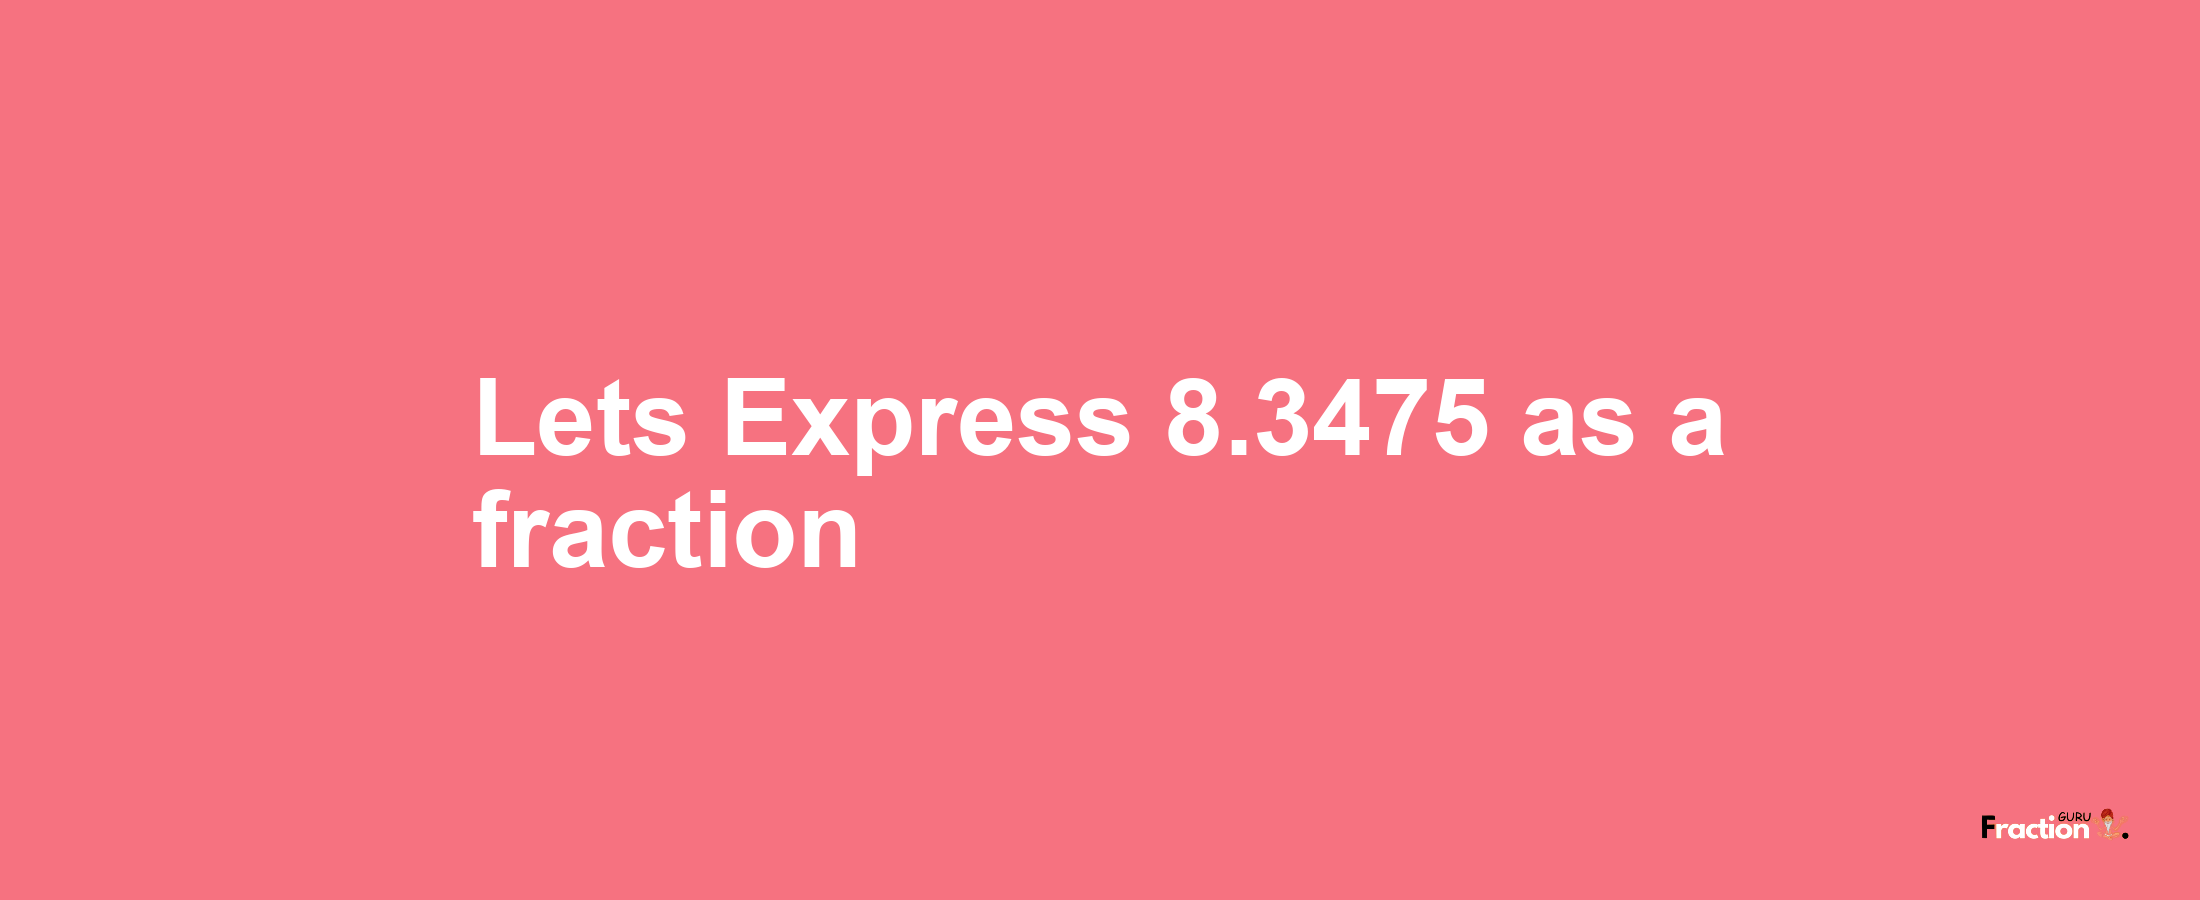 Lets Express 8.3475 as afraction